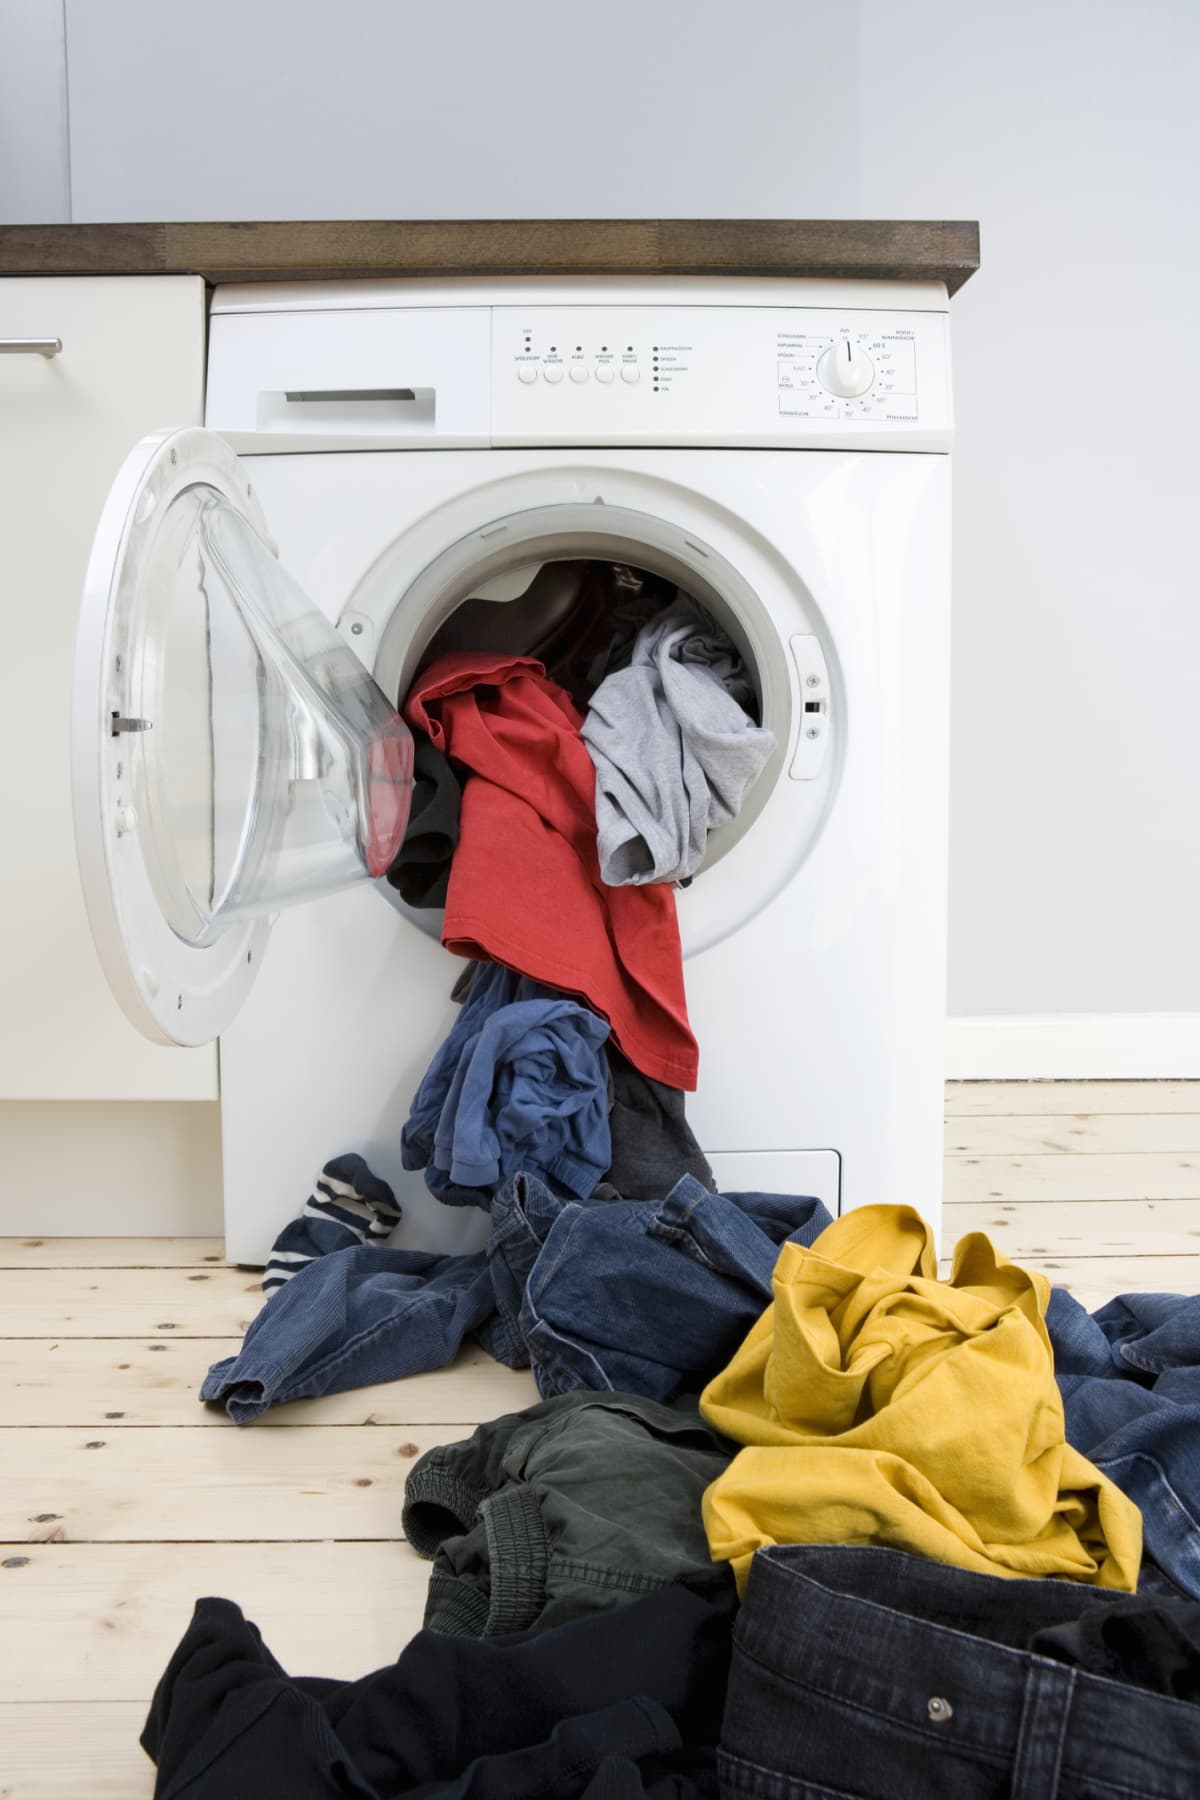 Clothes coming out of a washing machine